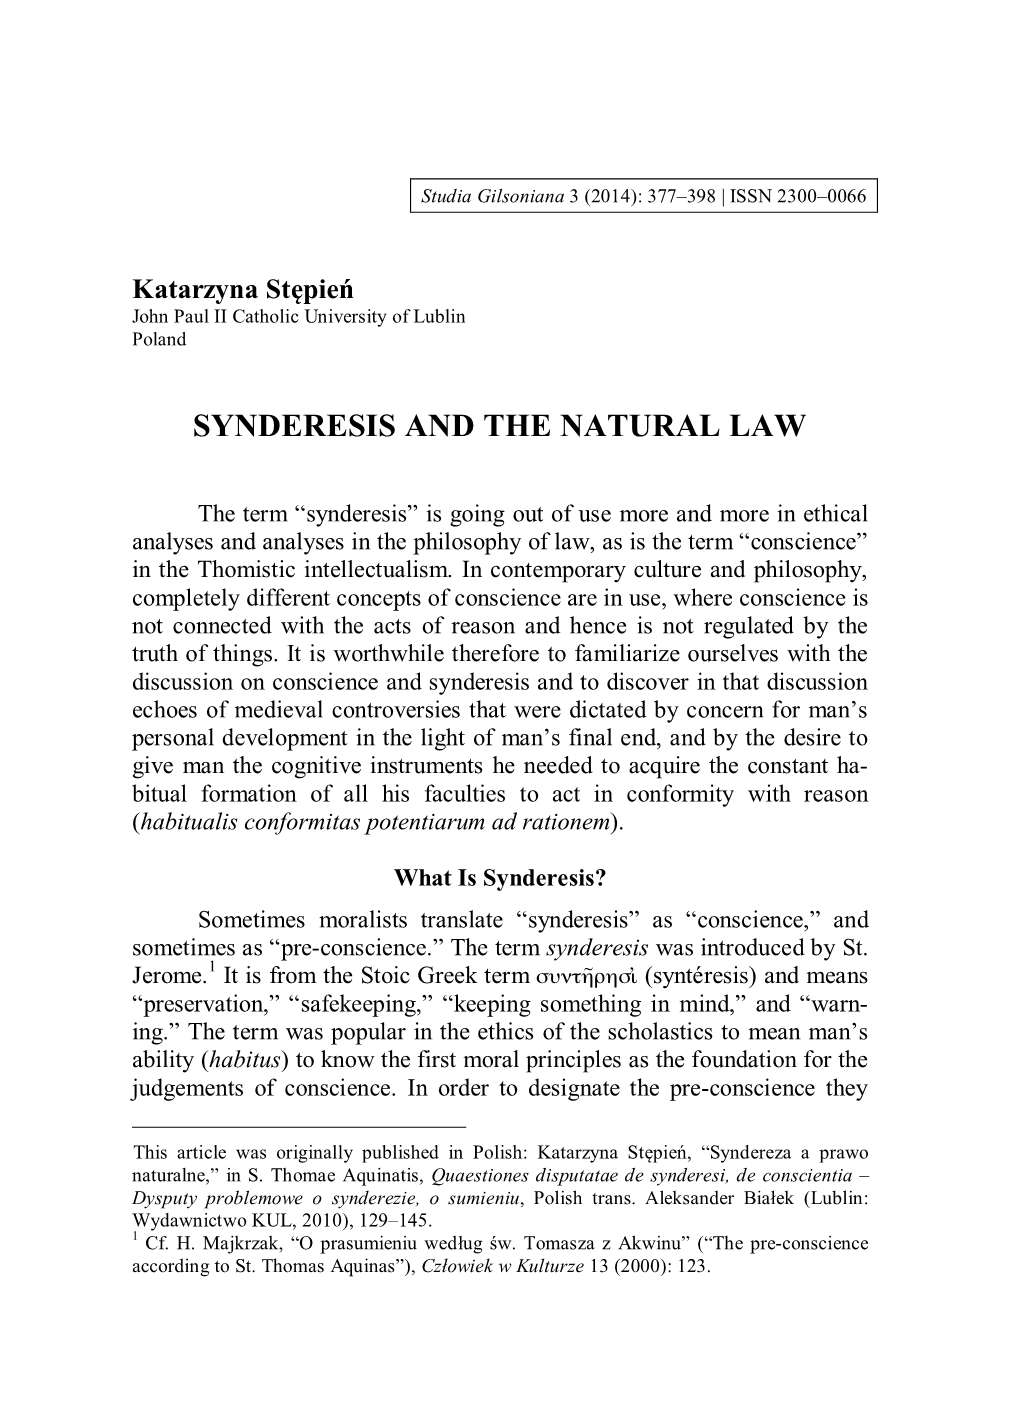 Synderesis and the Natural Law*